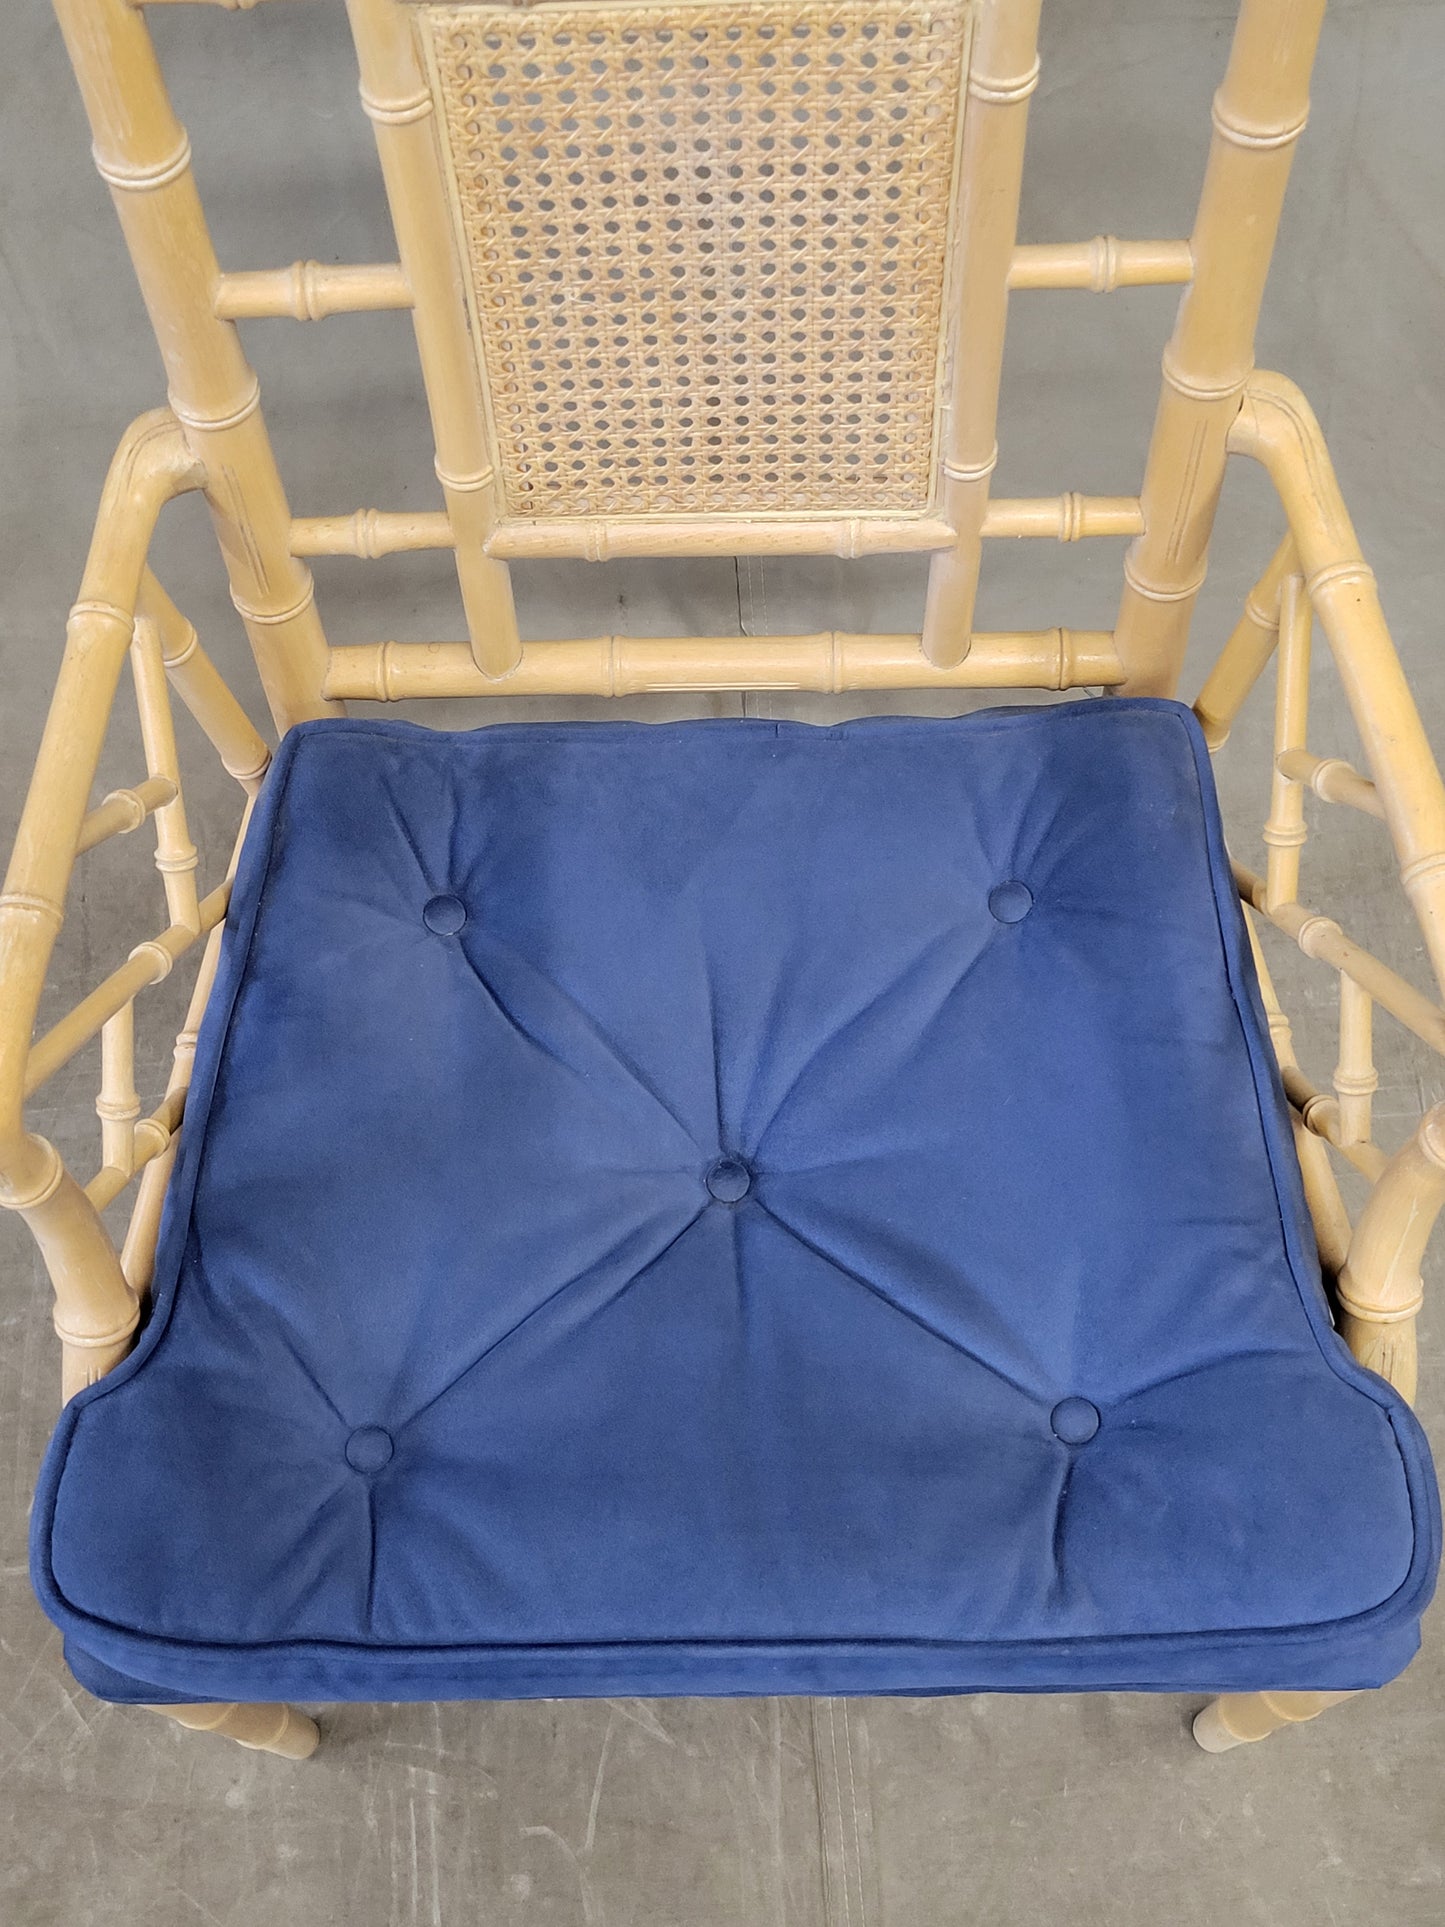 Vintage Faux Bamboo Chairs With Blue Cushions - a Pair